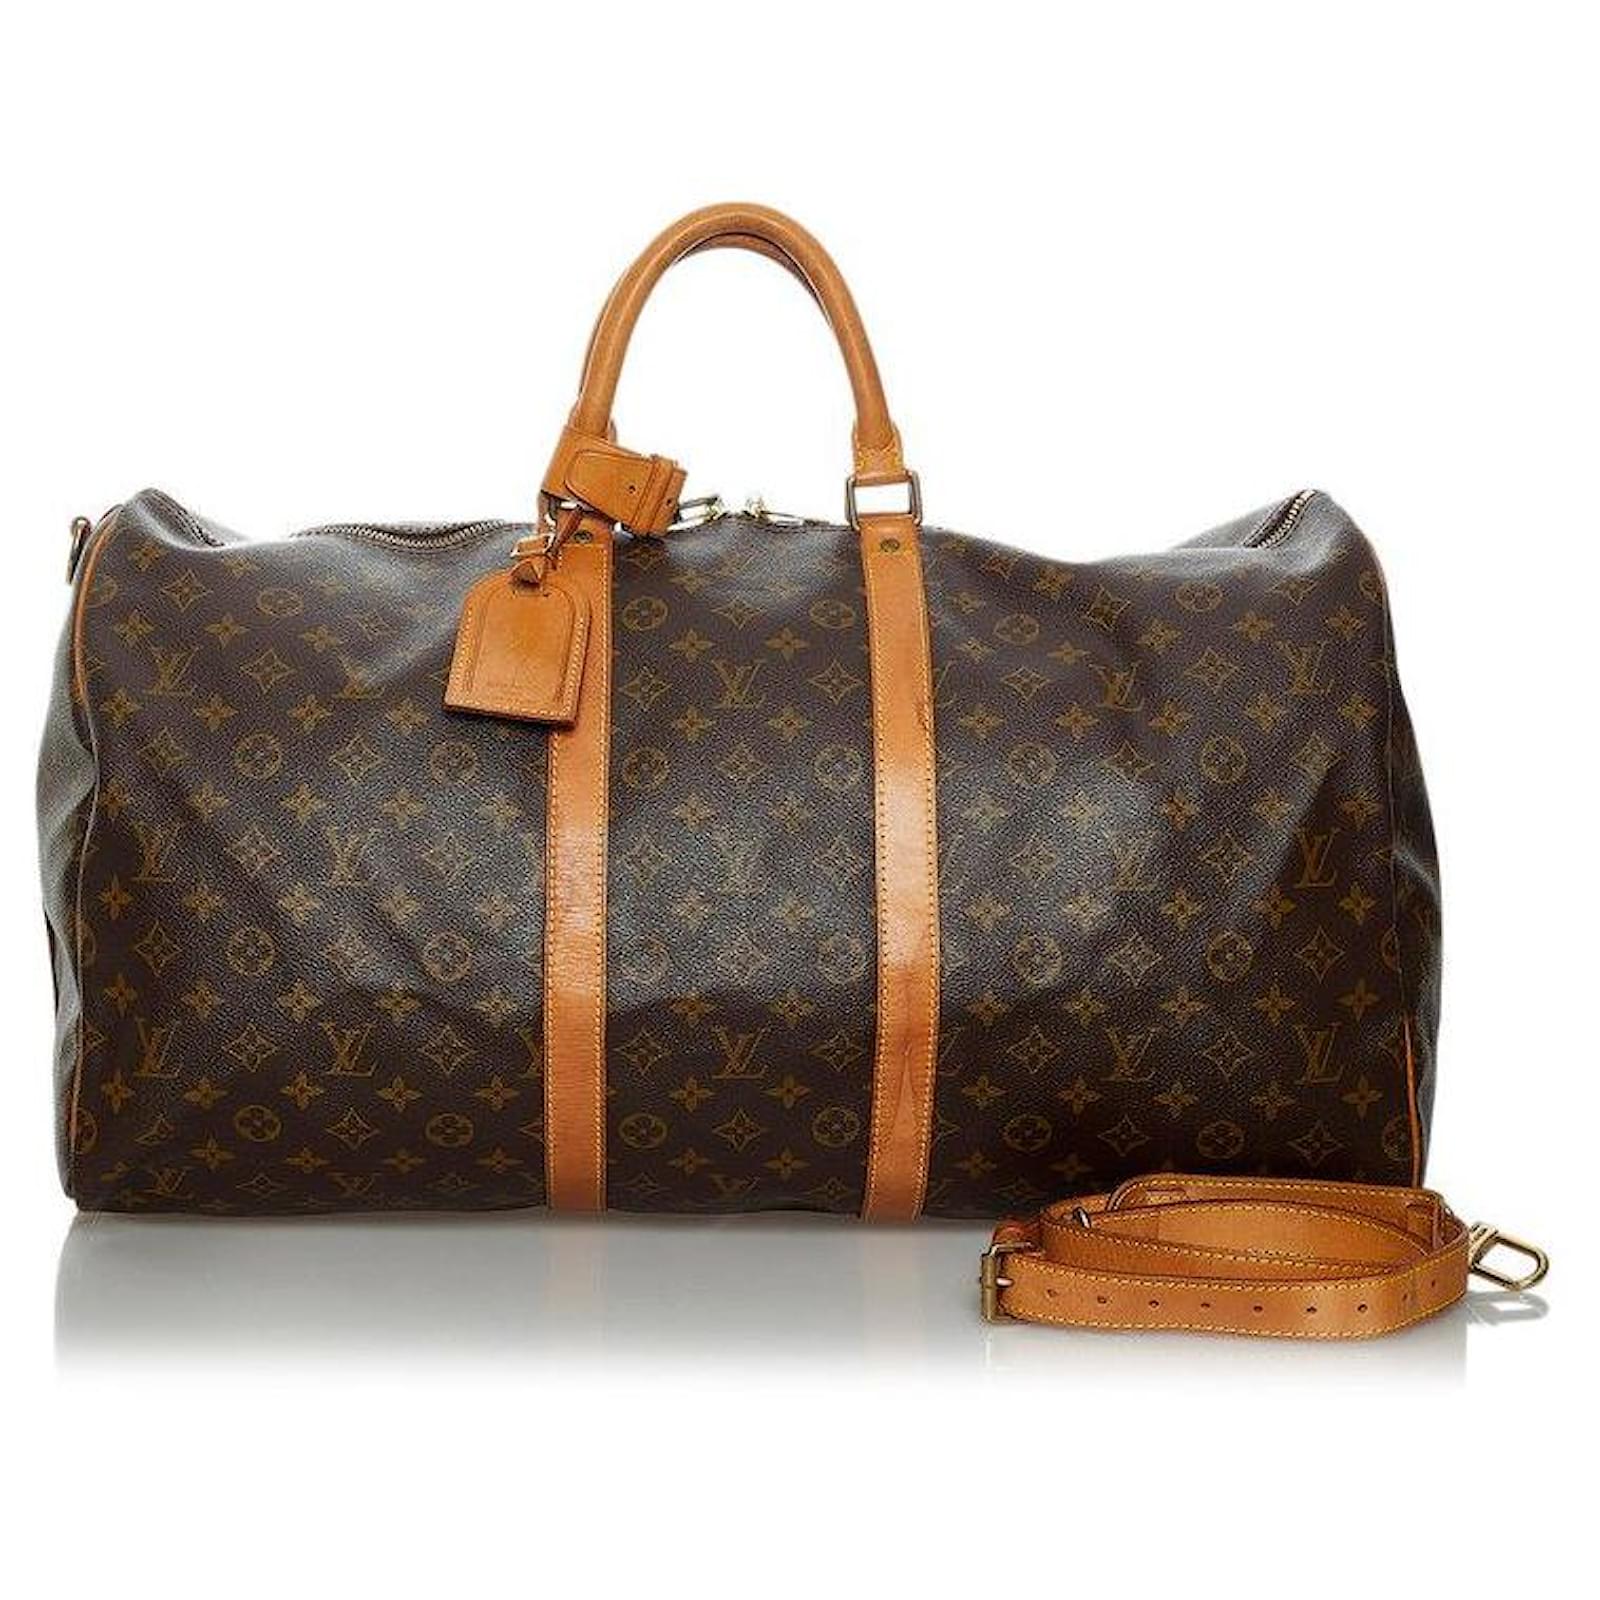 Louis Vuitton Keepall Bandouliere 55 Brown in Monogram Coated